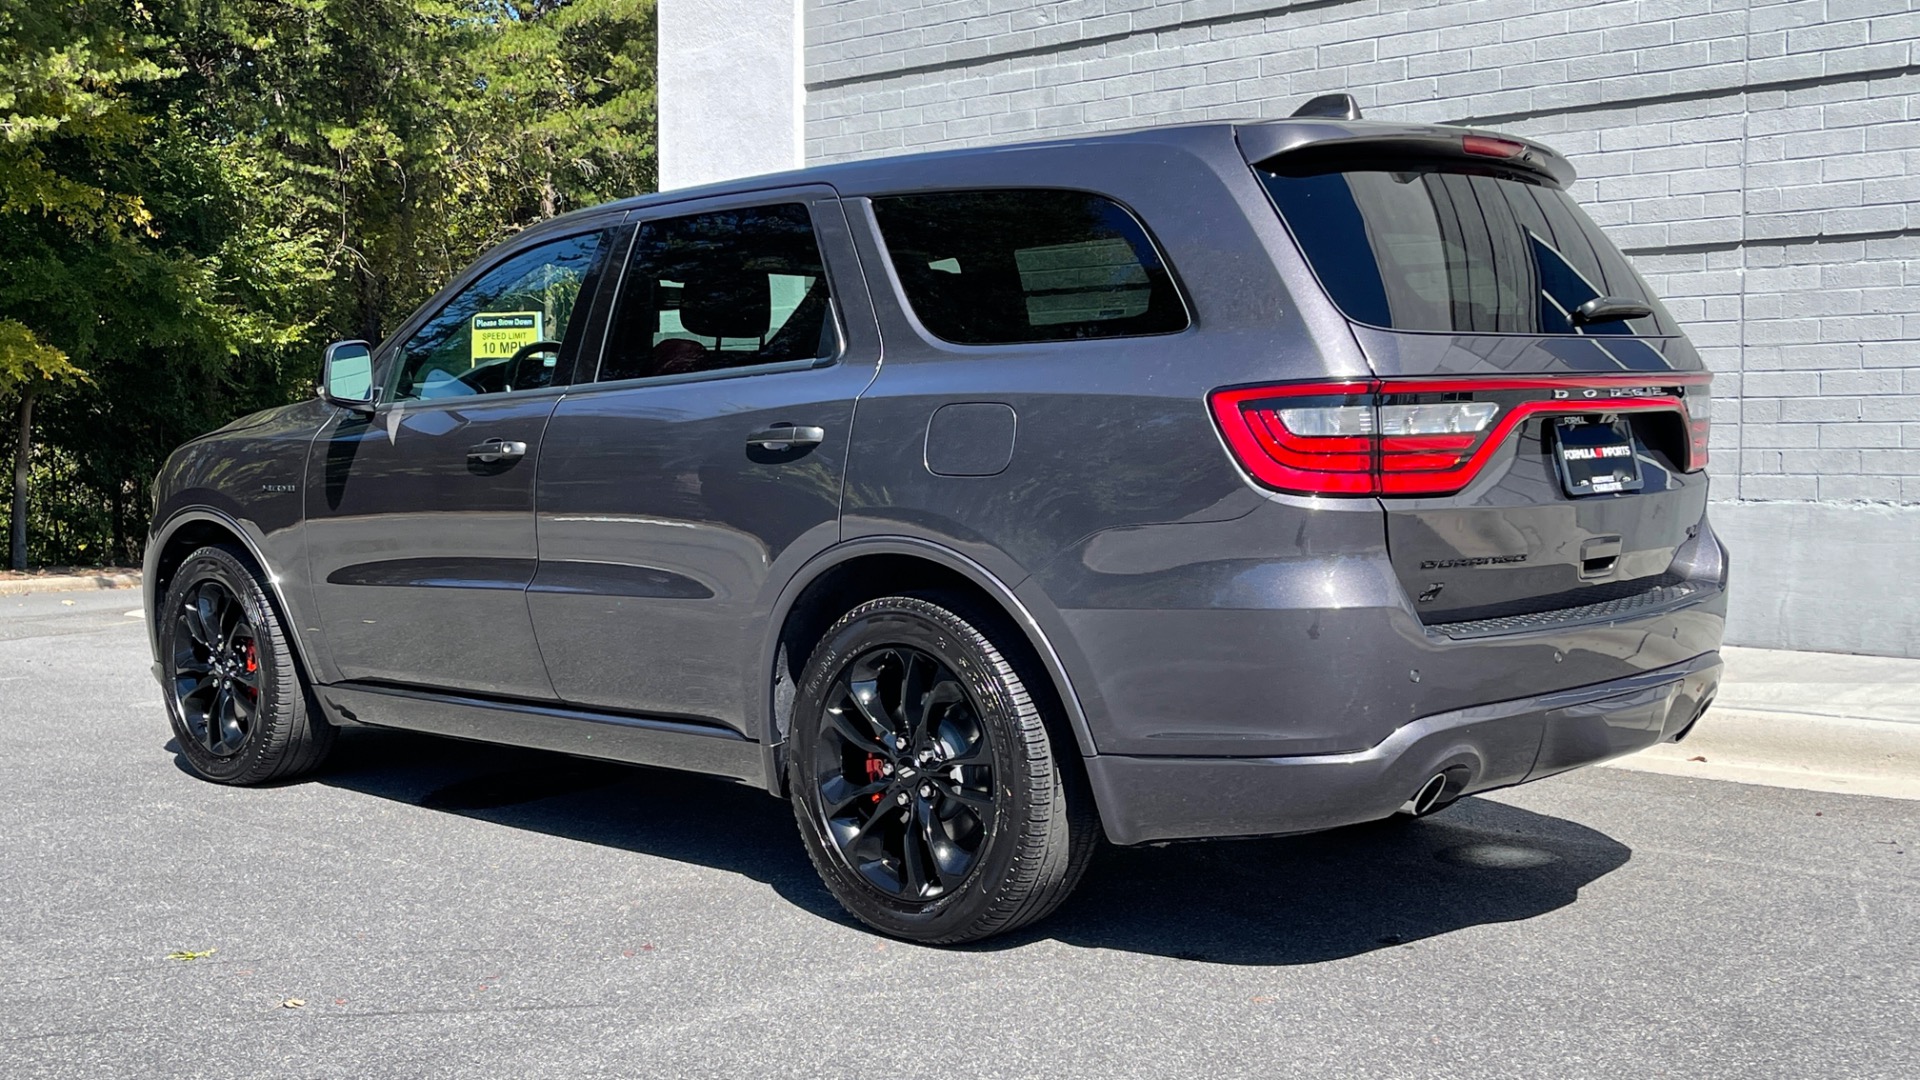 Used 2020 Dodge Durango R/T / HEMI / BLACKTOP / 20IN WHEELS / TOW PACKAGE for sale $45,995 at Formula Imports in Charlotte NC 28227 4